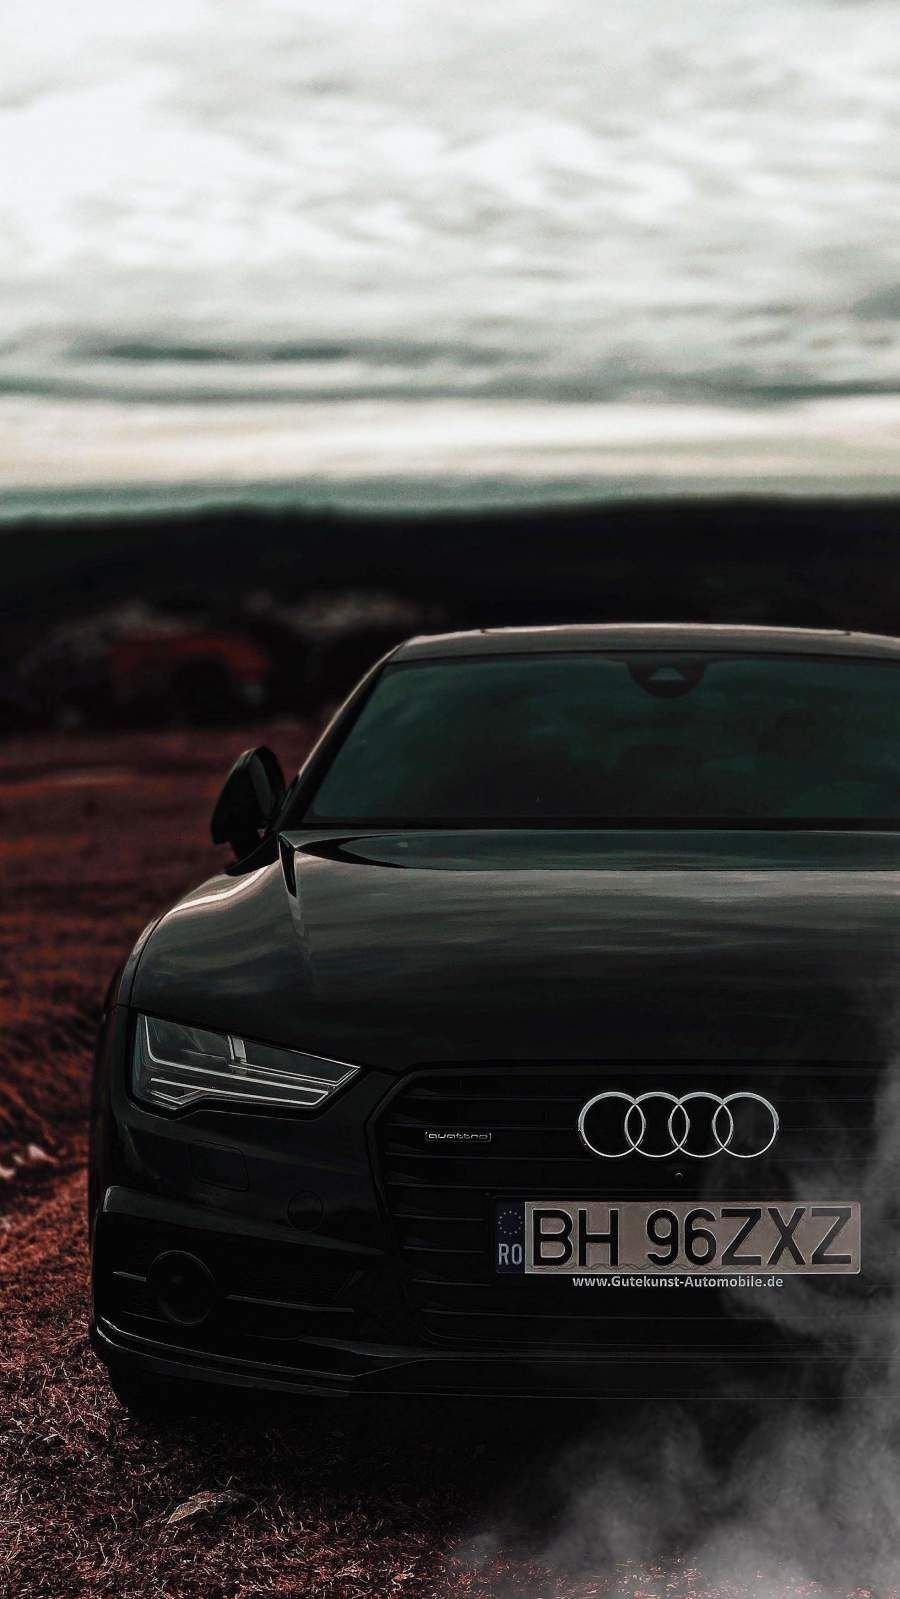 23 Incredible And Fascinating Audi Wallpapers To Check Out  Audi r8  wallpaper Sports car wallpaper Luxury cars